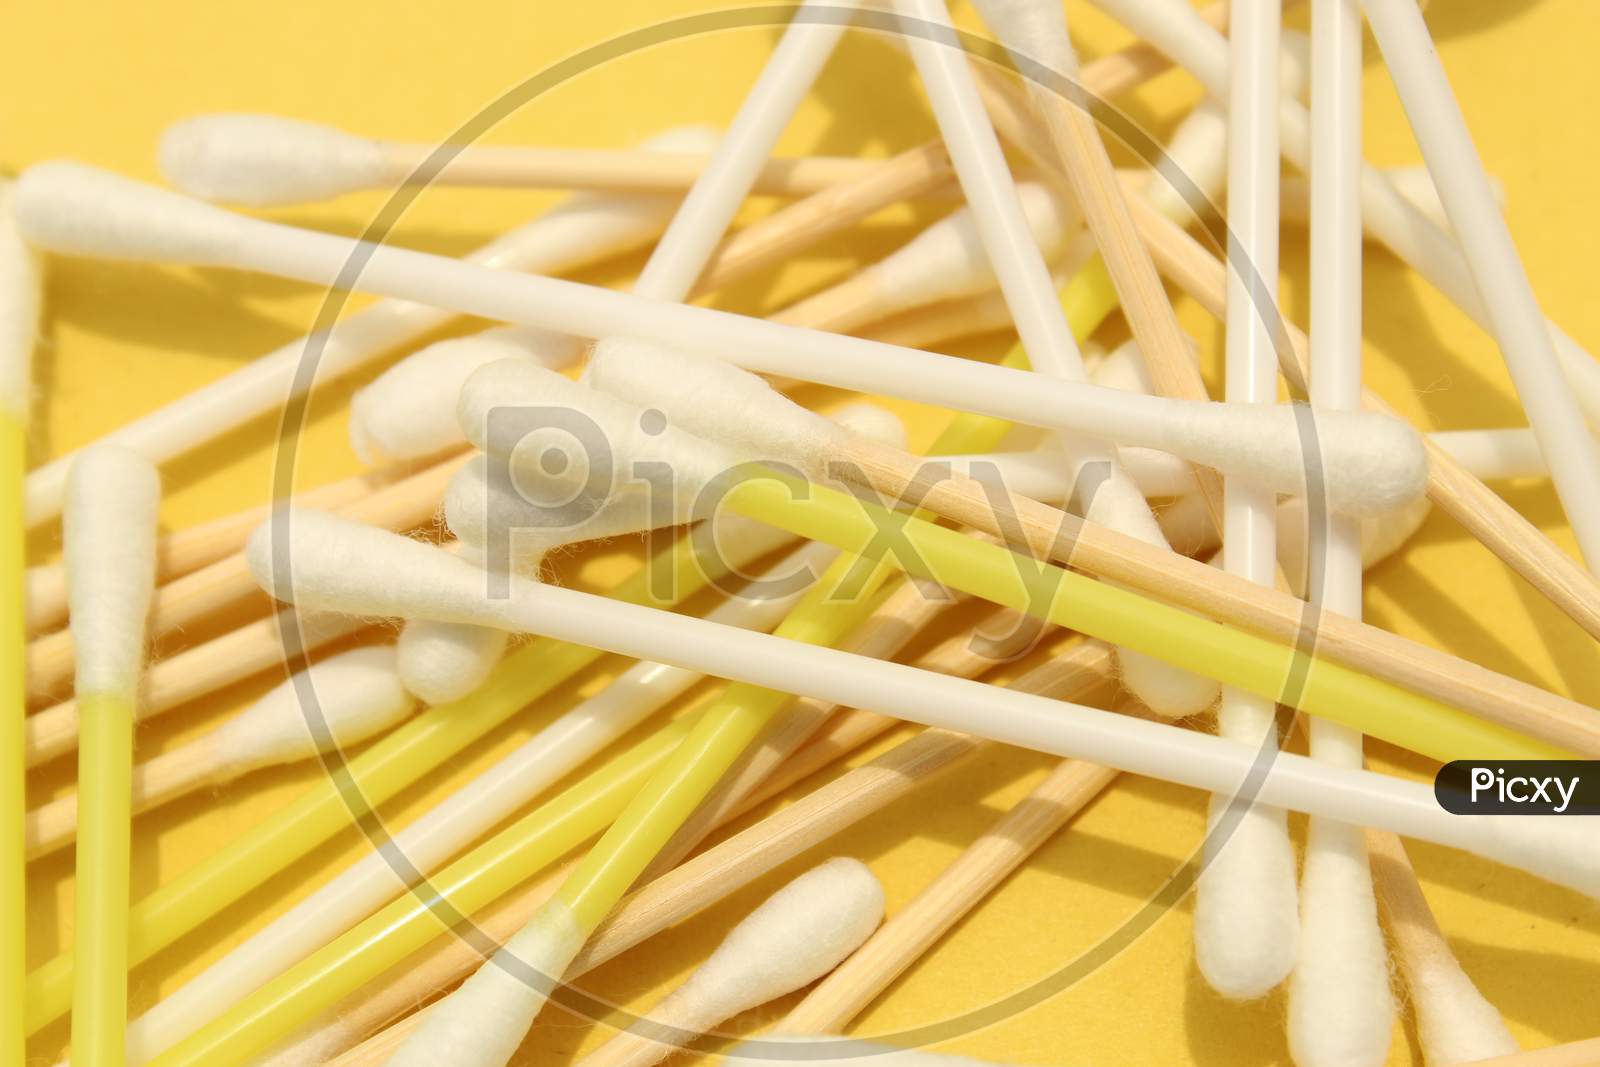 Cotton made ear buds all together close display on yellow background.